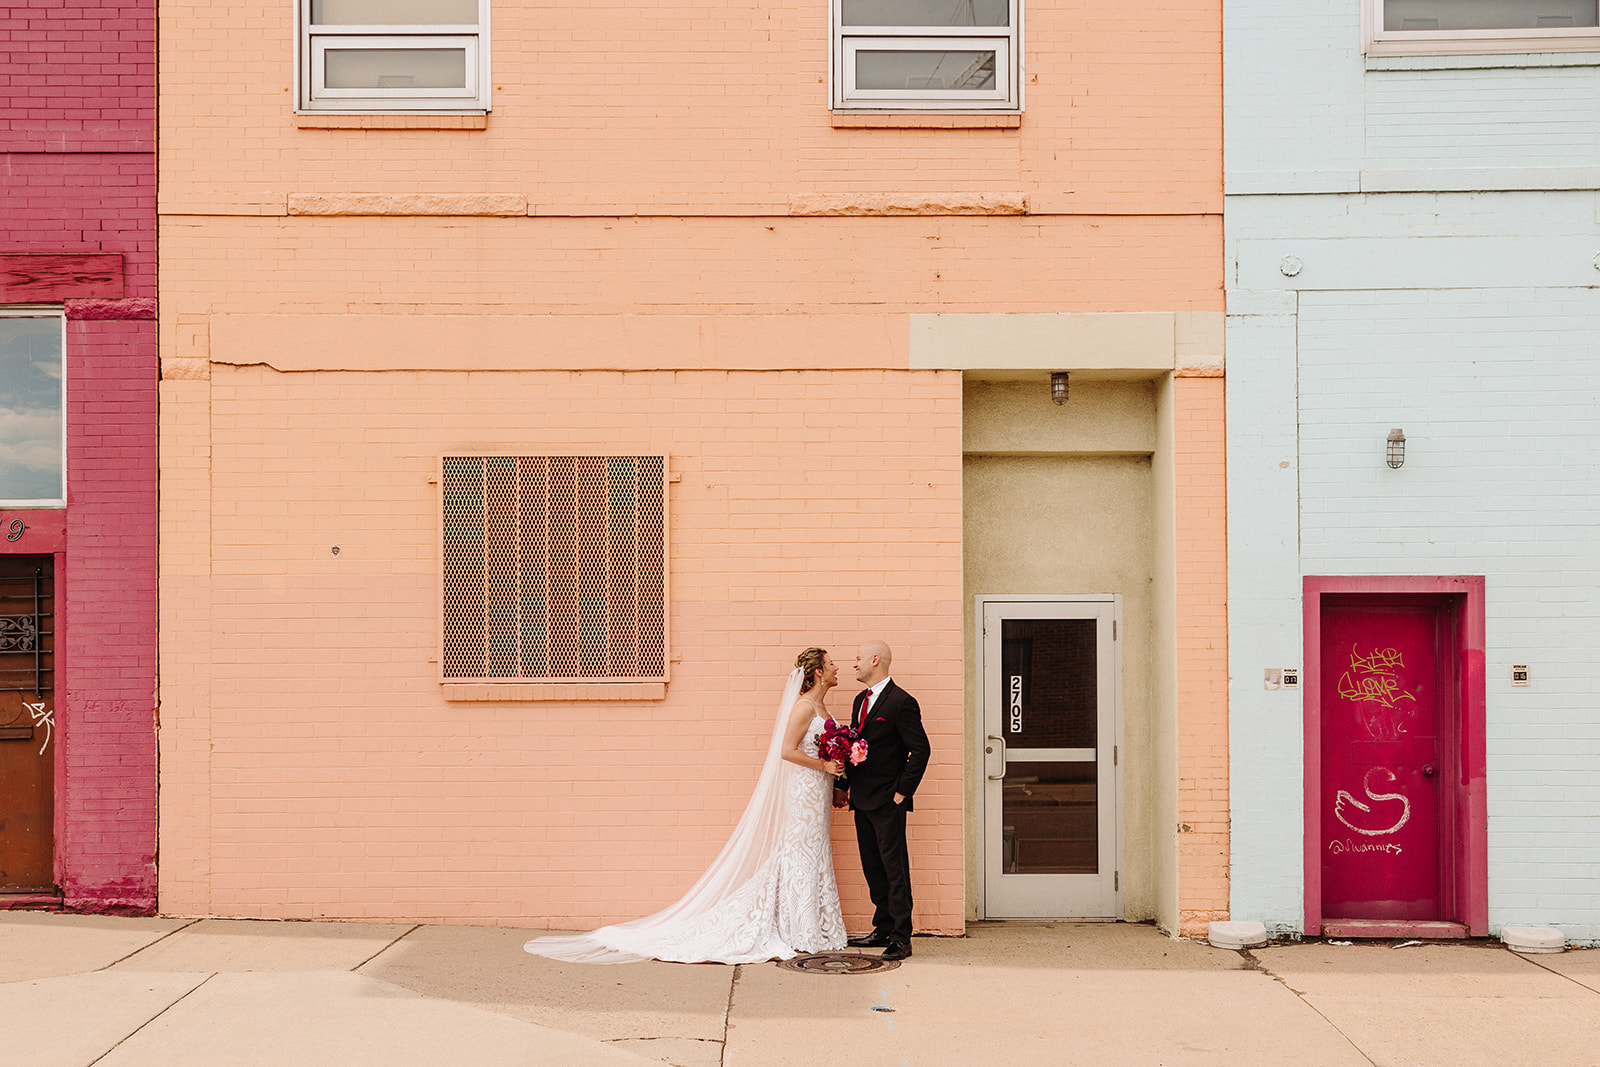 Colorful wedding portraits in downtown Denver.